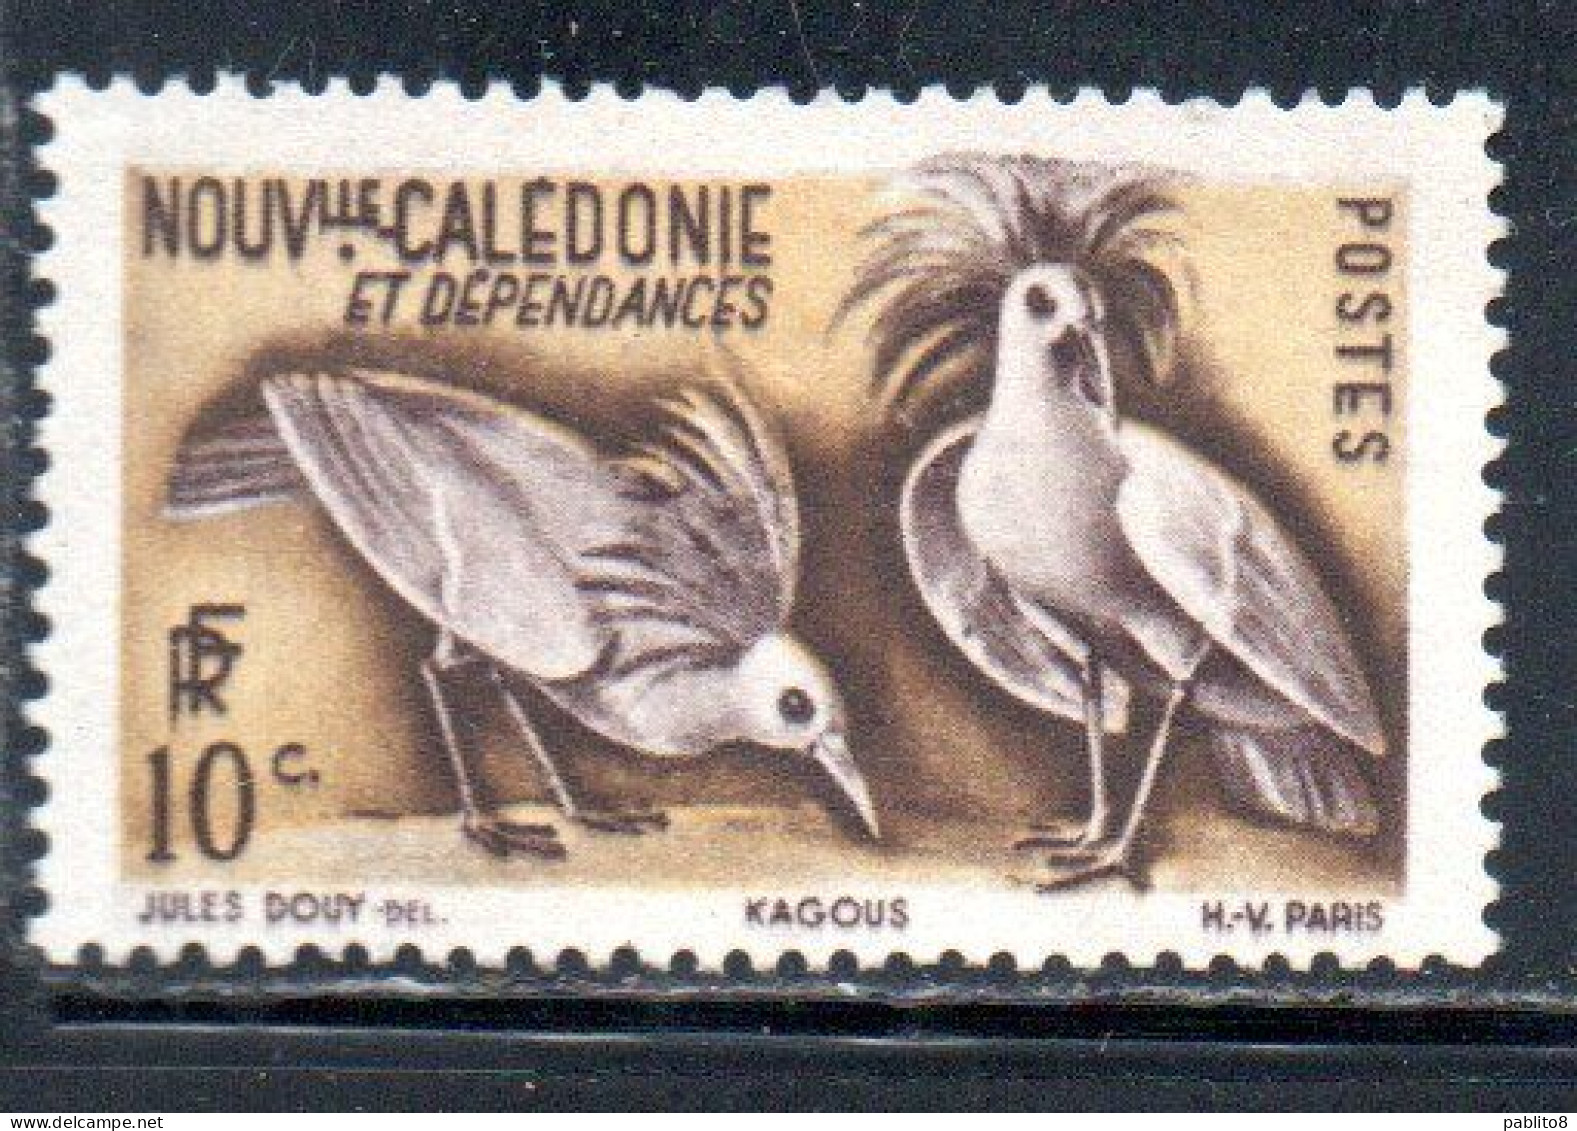 NOUVELLE CALEDONIE NEW NUOVA CALEDONIA 1948 KAGOUS KAGUS 10c MH - Used Stamps